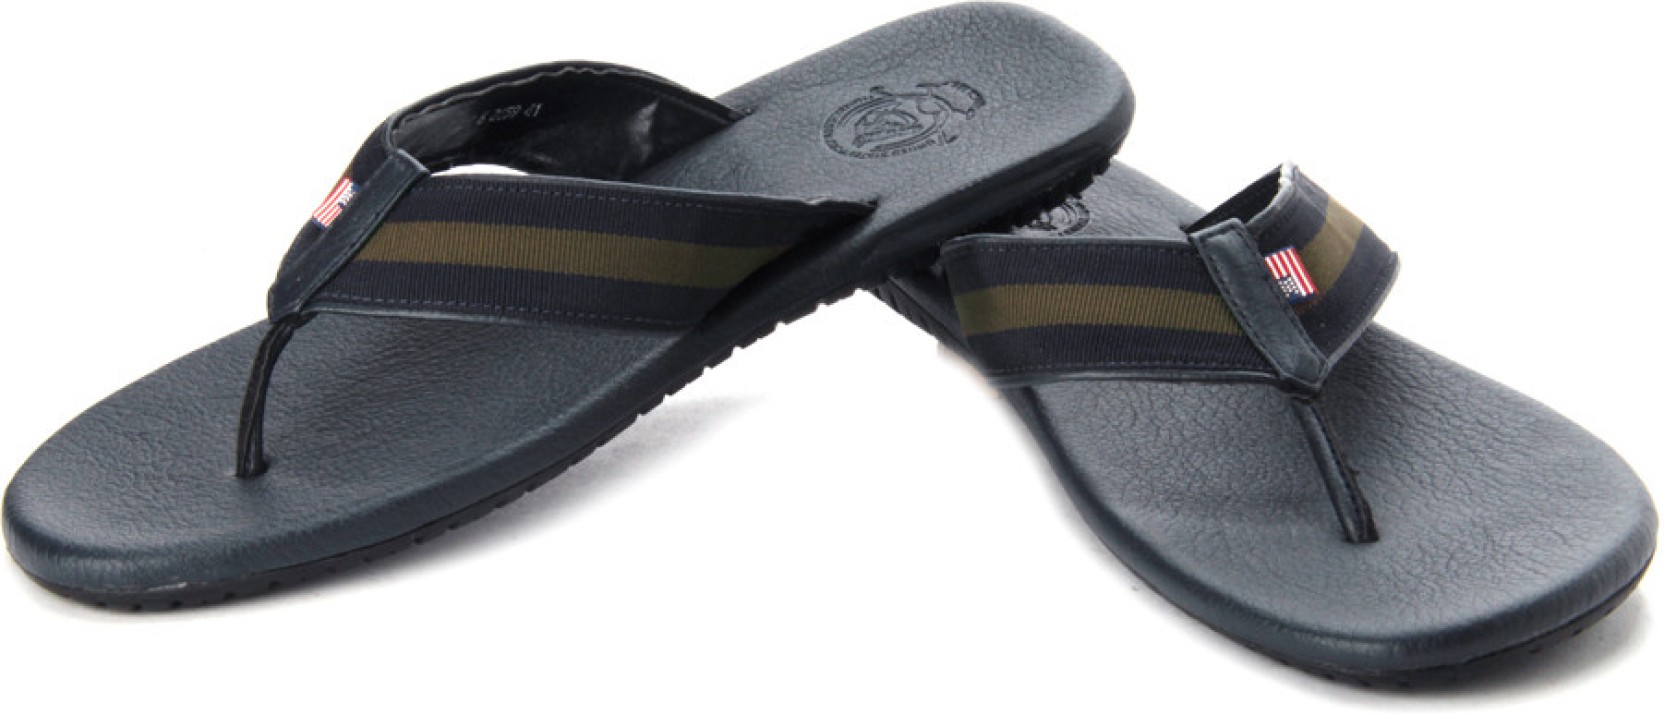 U.S. Polo Assn Slippers - Buy Olive, Navy Color U.S. Polo Assn Slippers ...